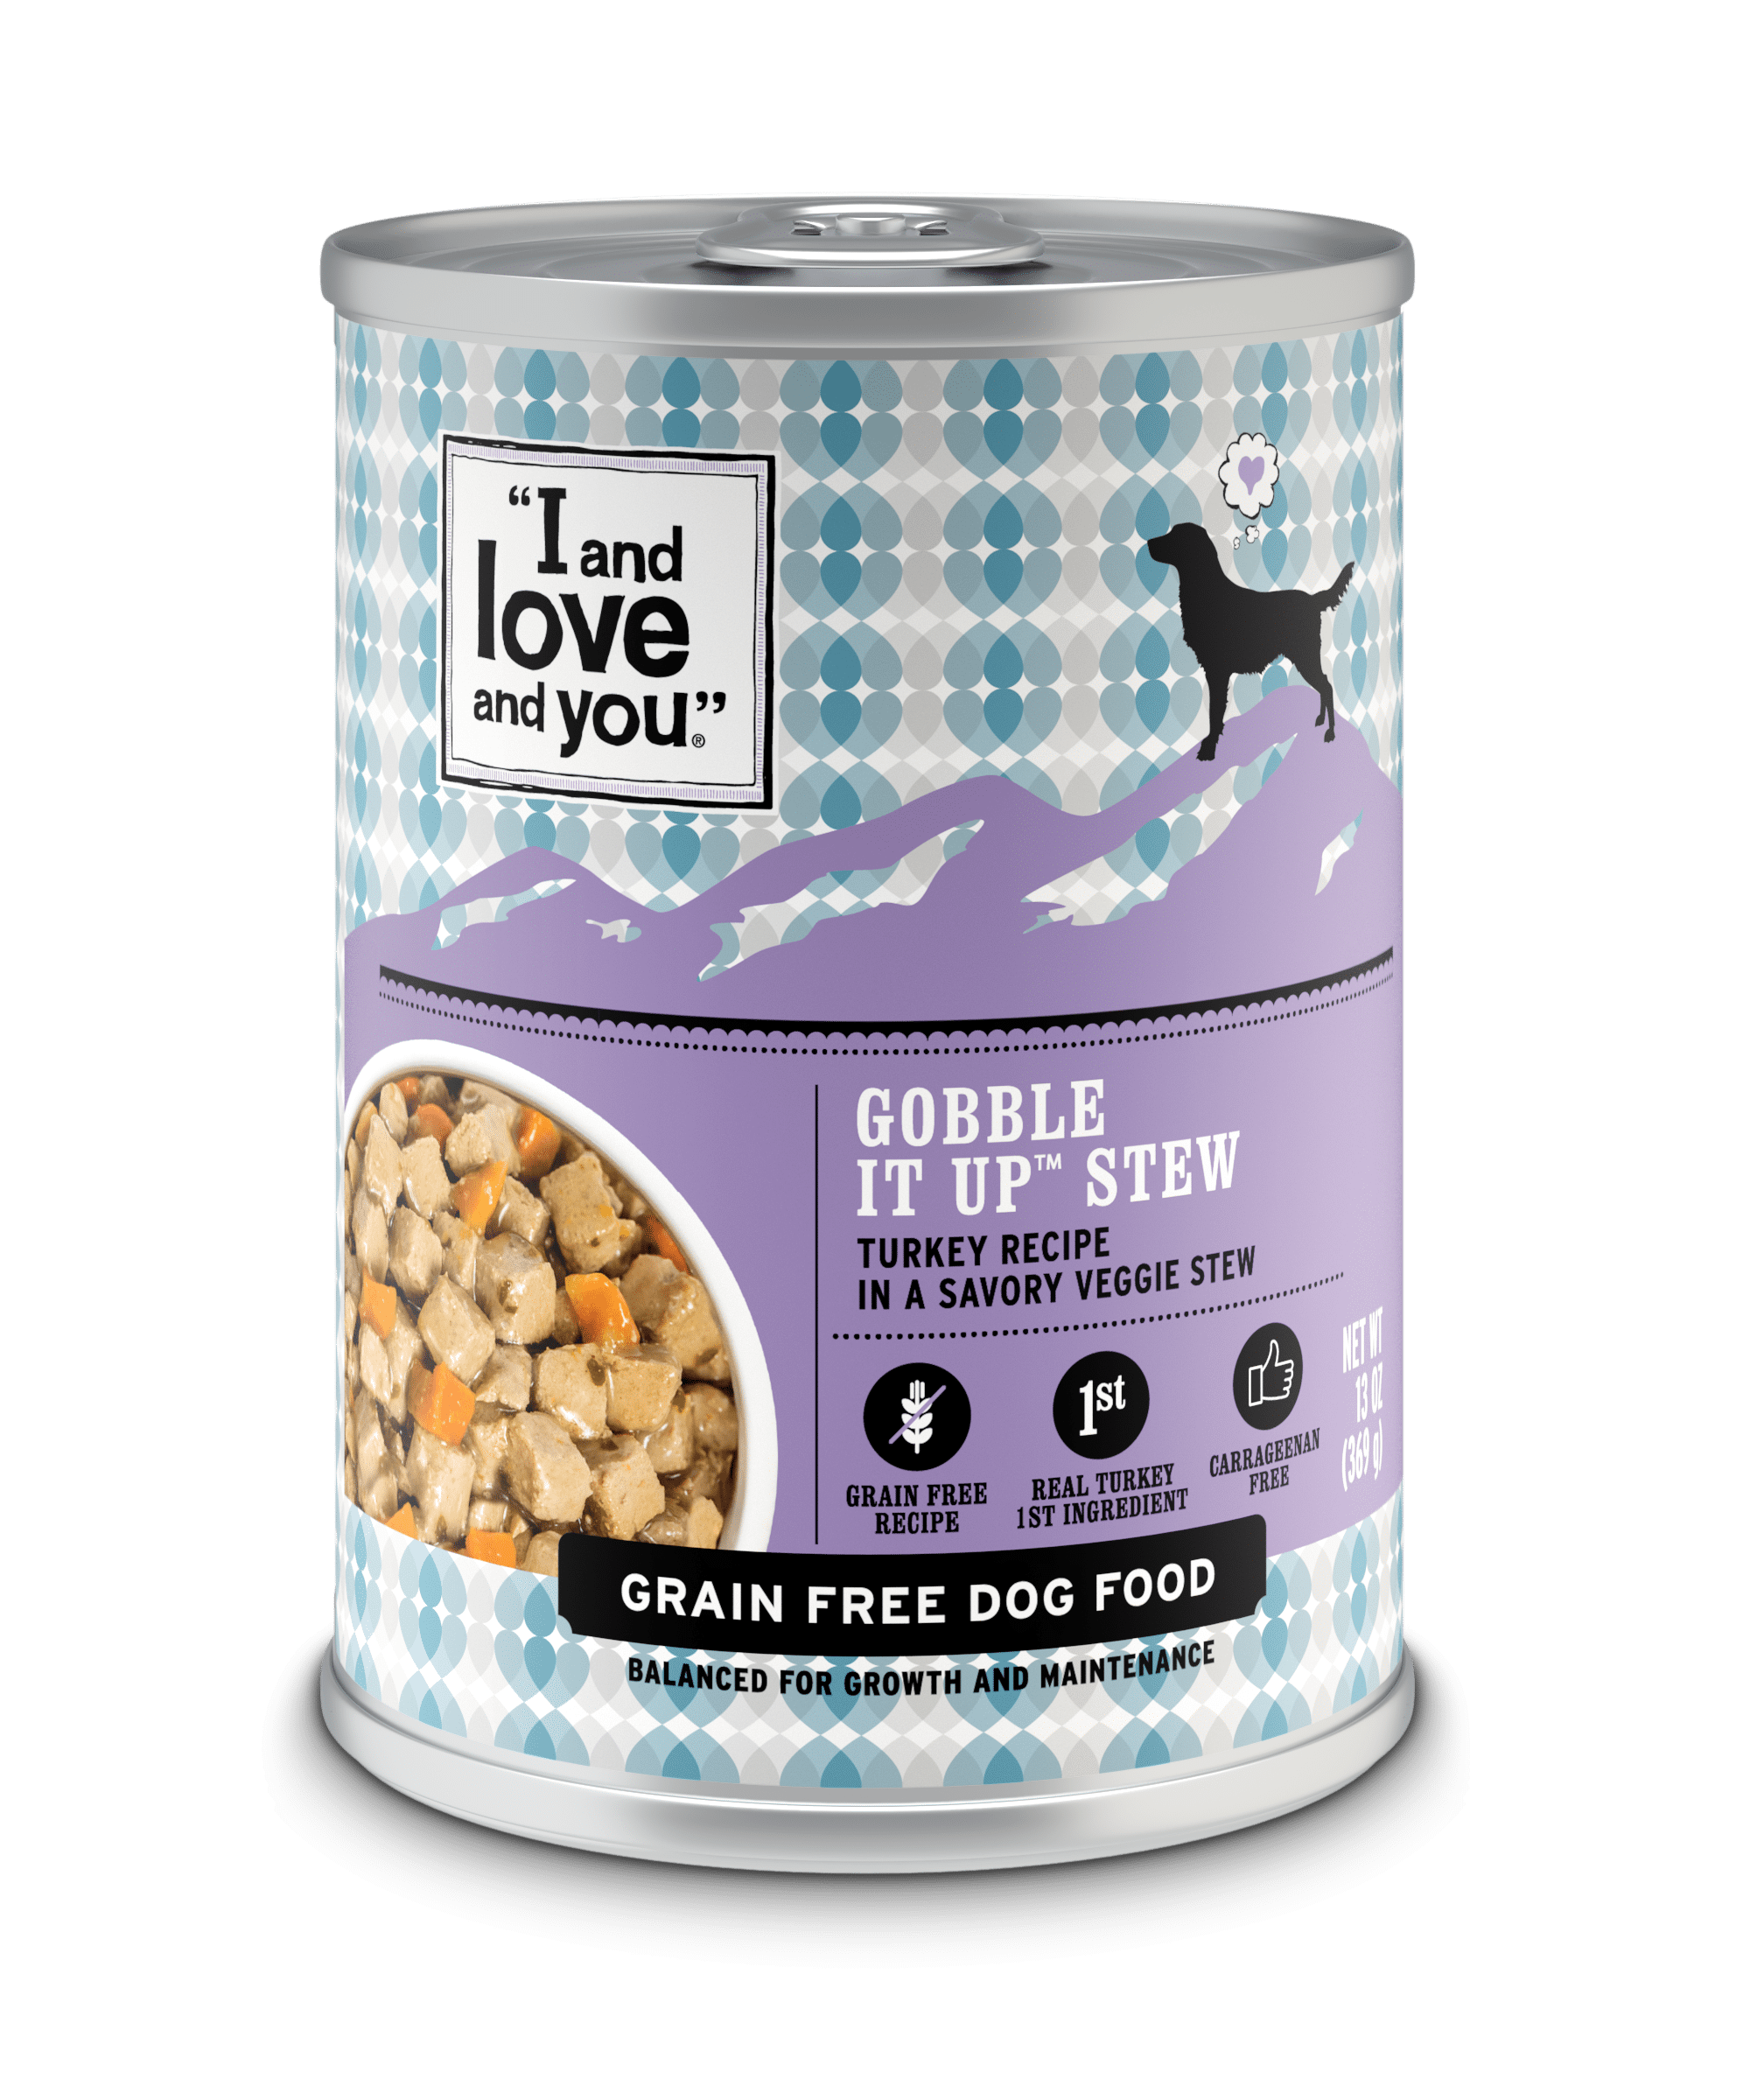 (12 Pack) "I and love and you." Gobble It Up Stew Wet Dog Food, 13 oz